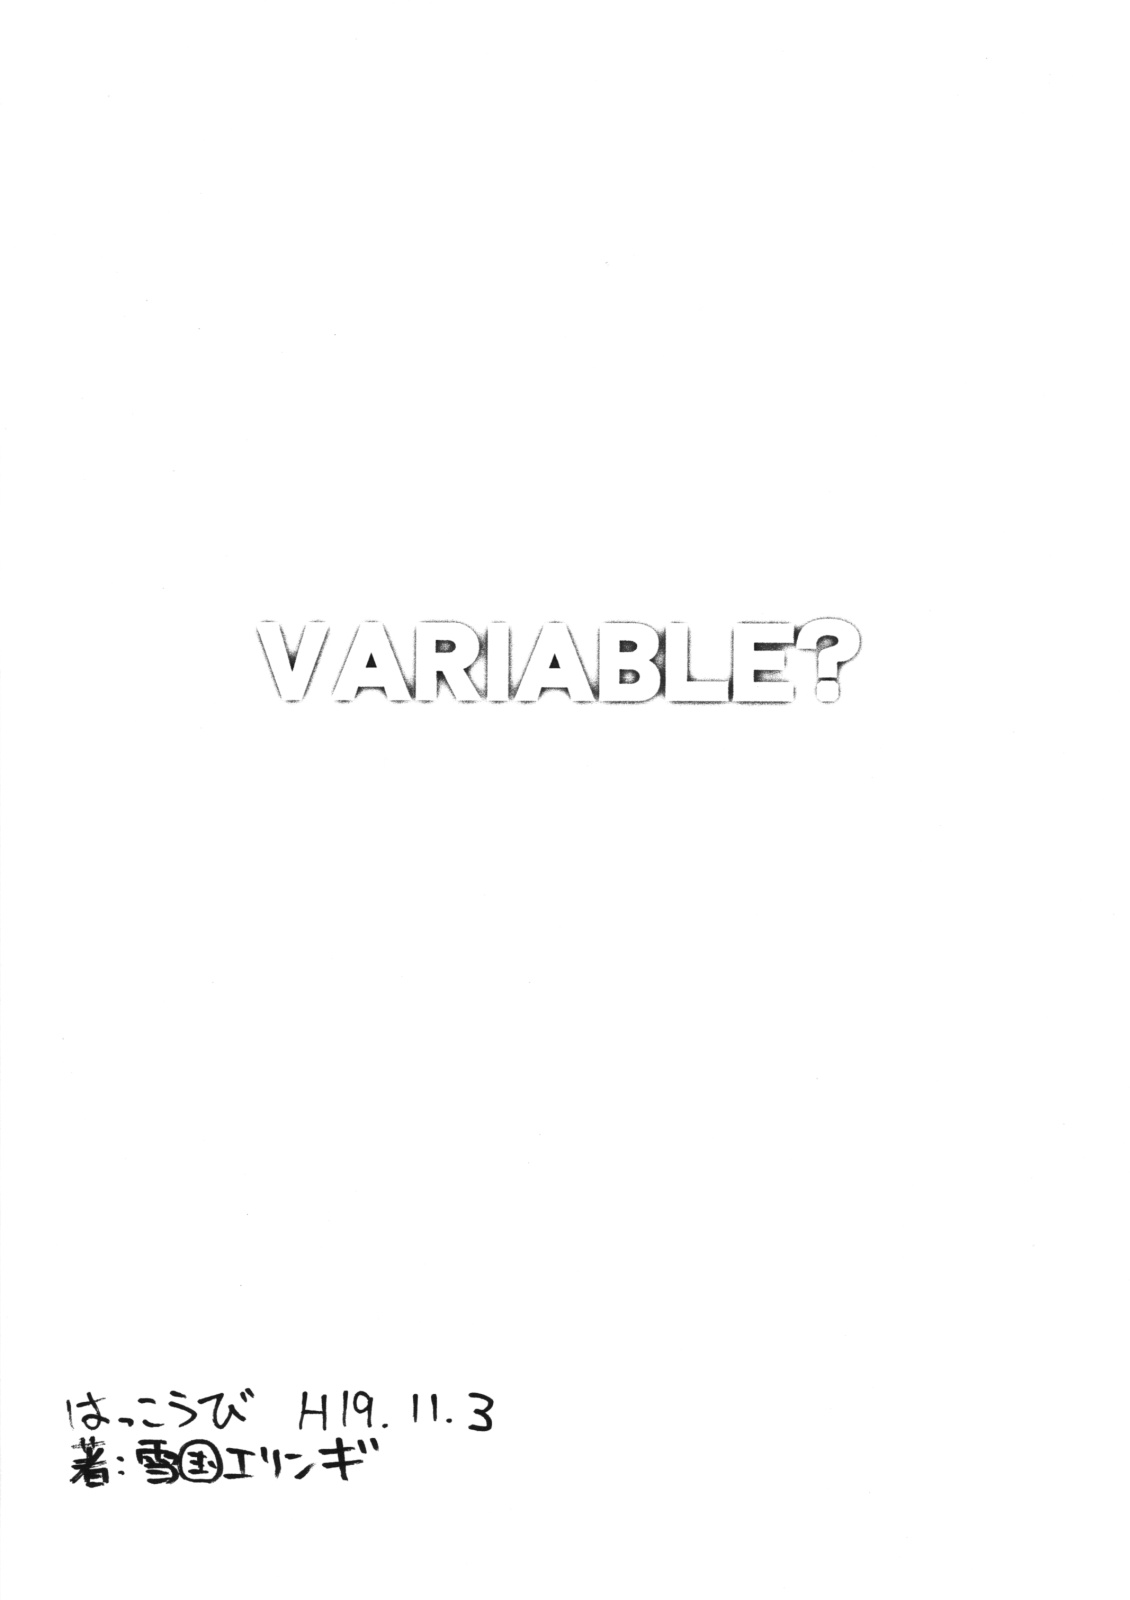 [VARIABLE？] THE ケン様の妄想